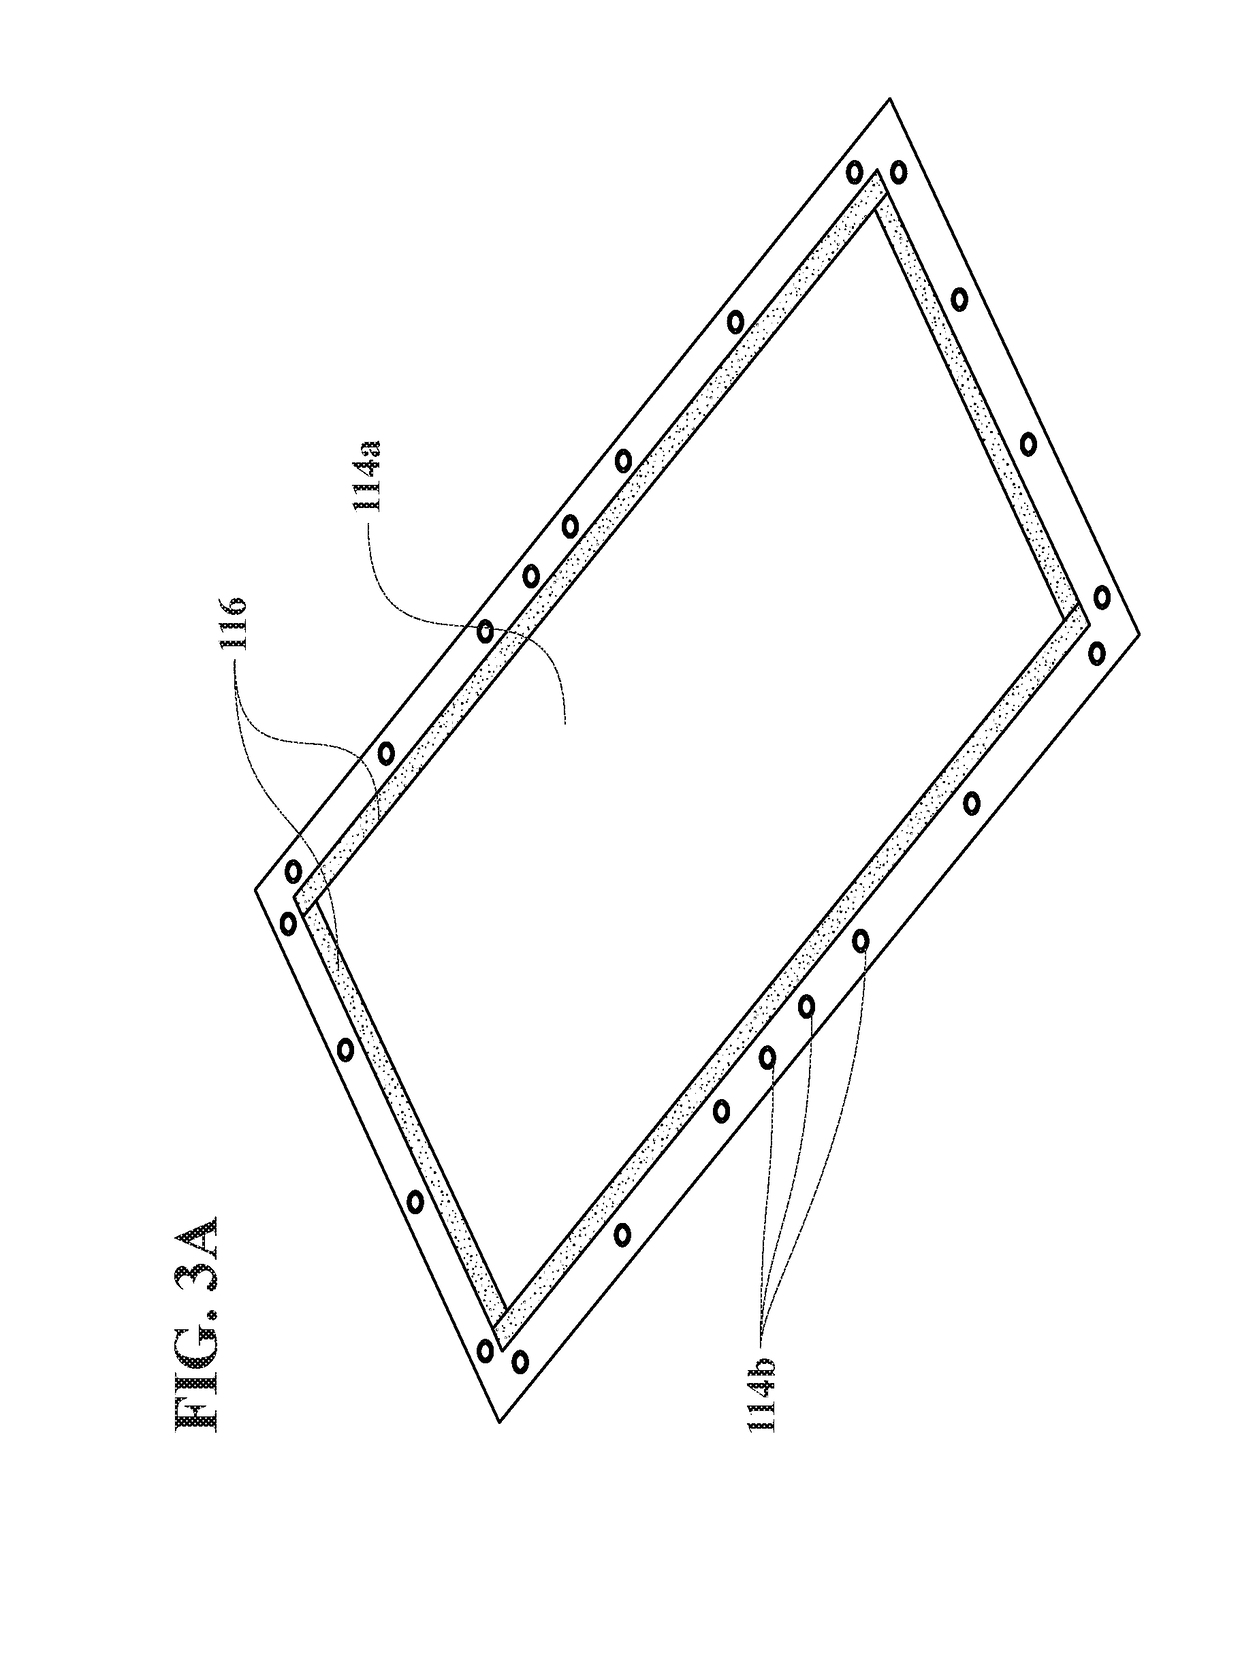 At-least-twenty-four-different-configuration pet kennel, having angled clamp system, parallel clamp system, angled stilt system, parallel stilt system, wind-circulating sail system, and rain-circulating gutter system